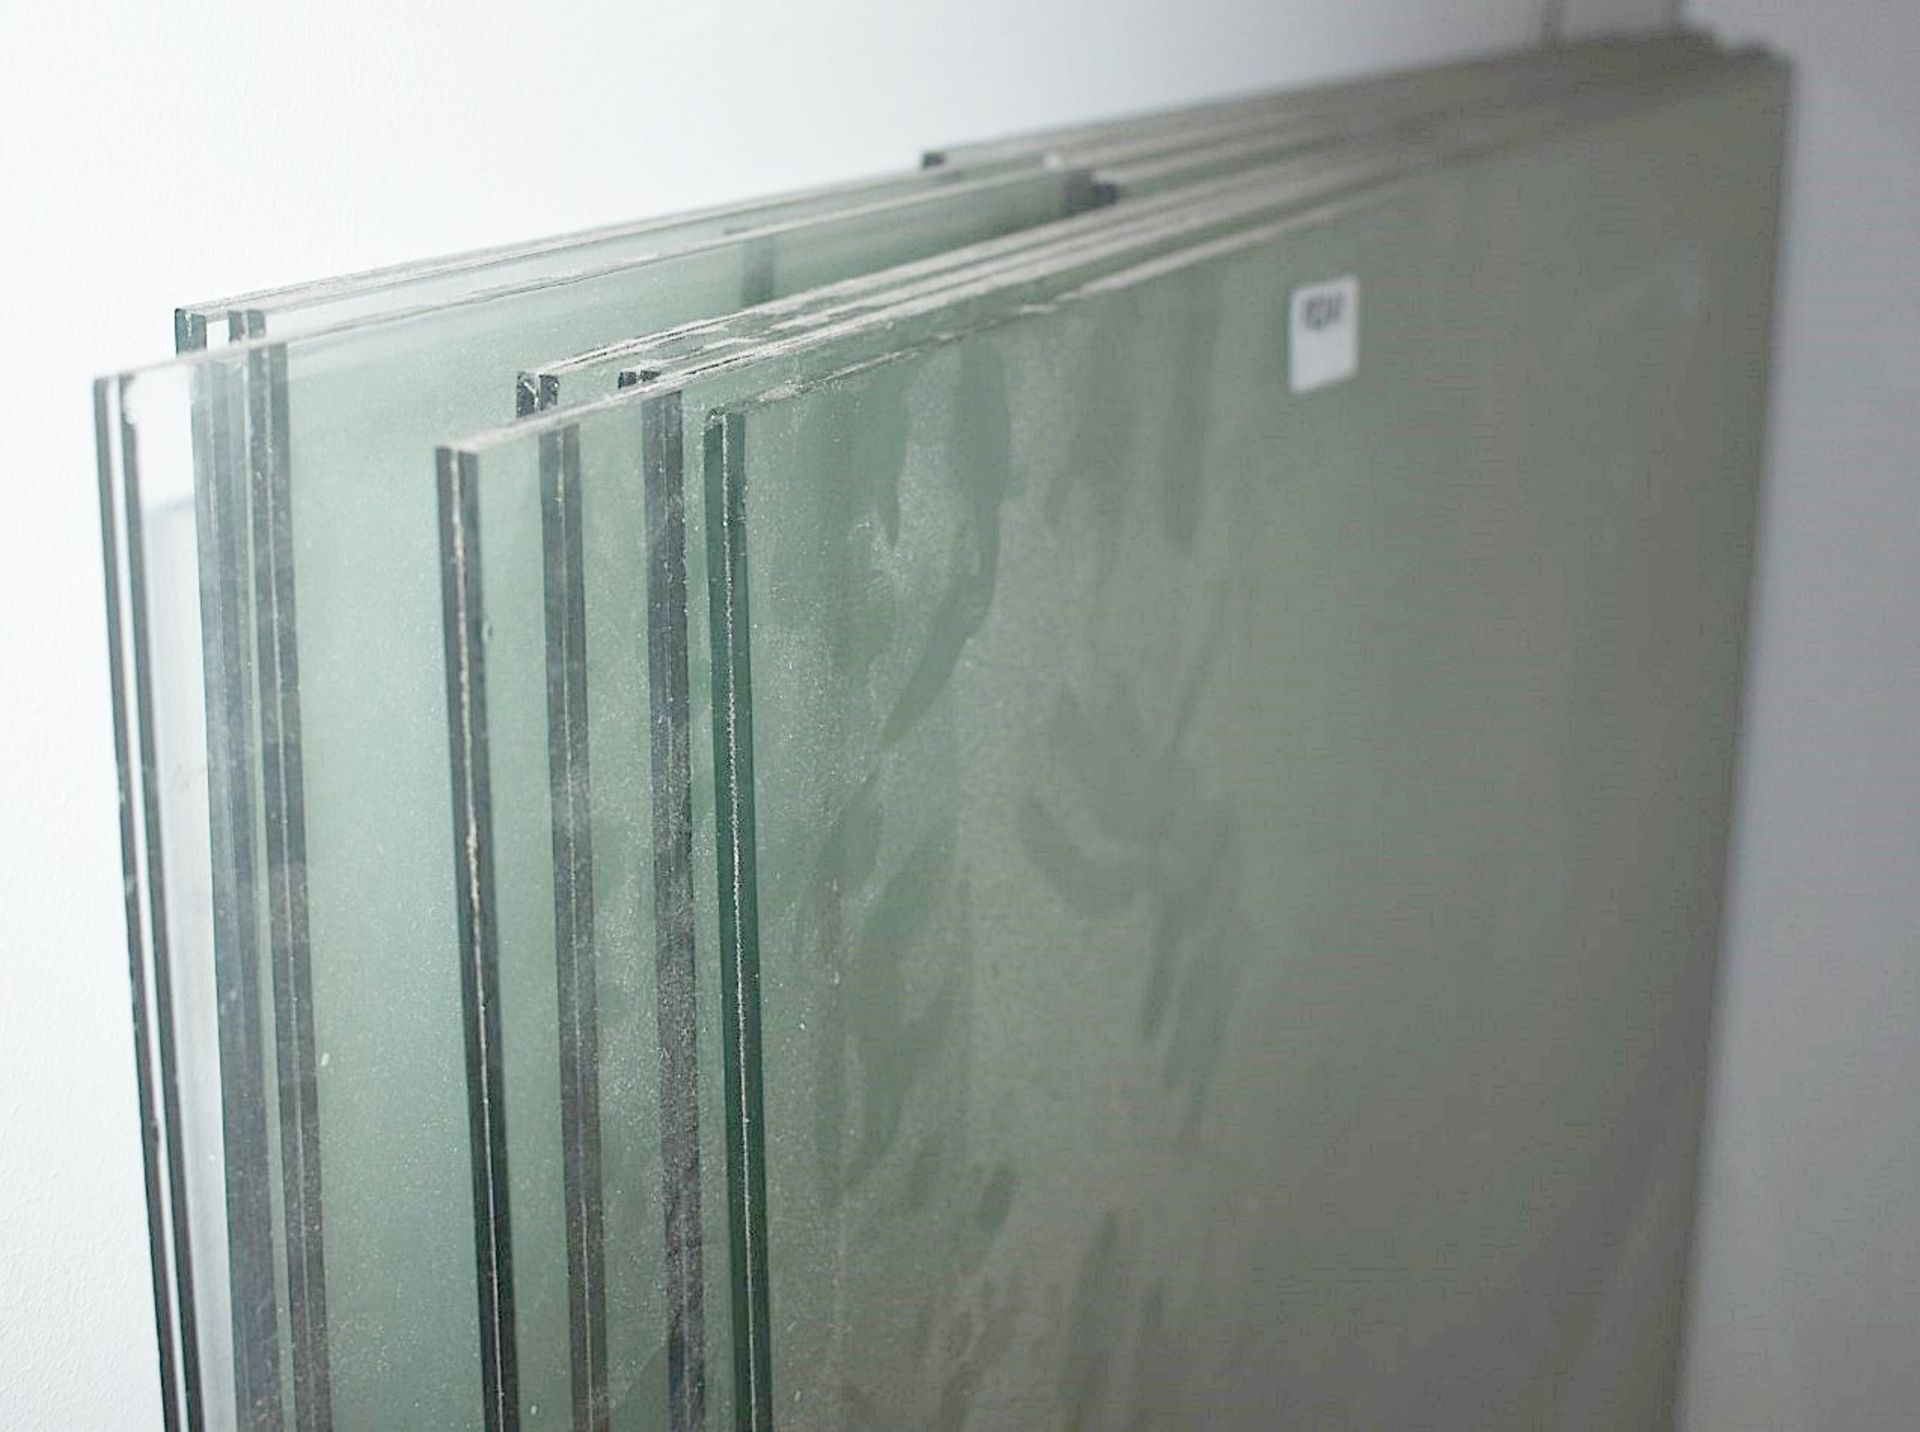 12 x Sheets of Clear Perspex - Height 123 cm x Largest Width 139 cms - Ref FE241 ODS - CL480 - - Image 2 of 2